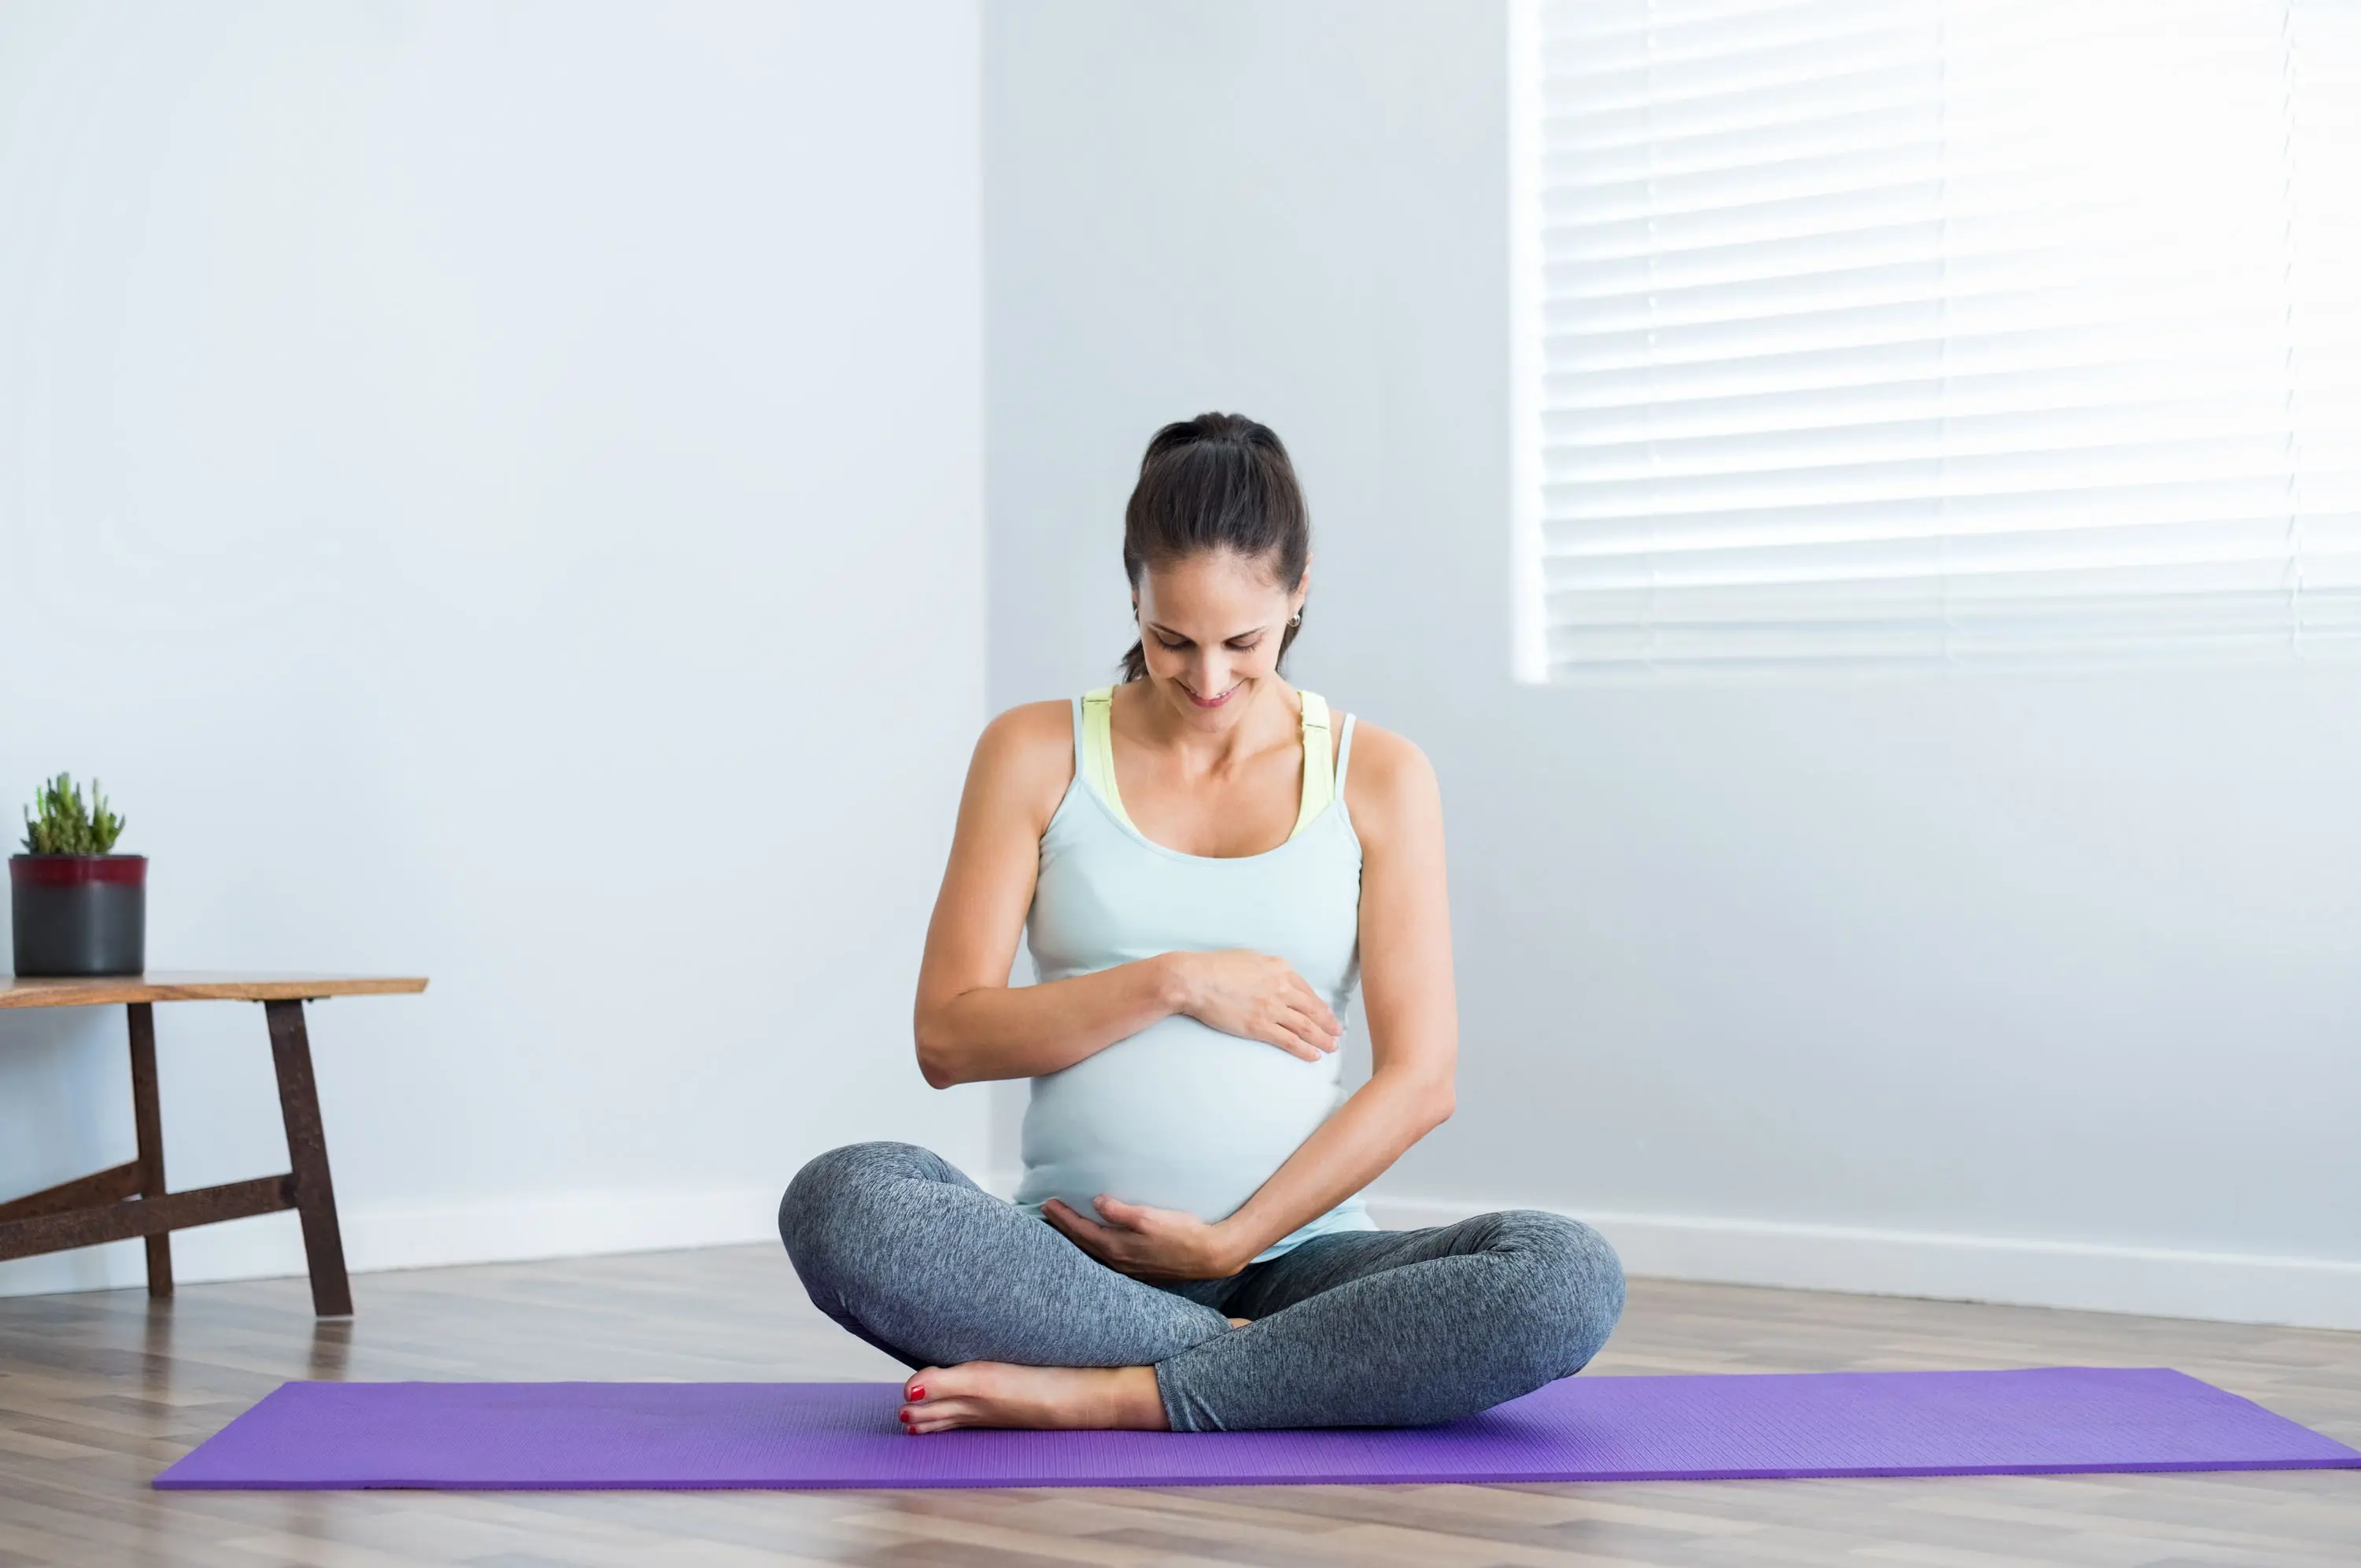 Pregnant woman sitting on yoga mat scaled